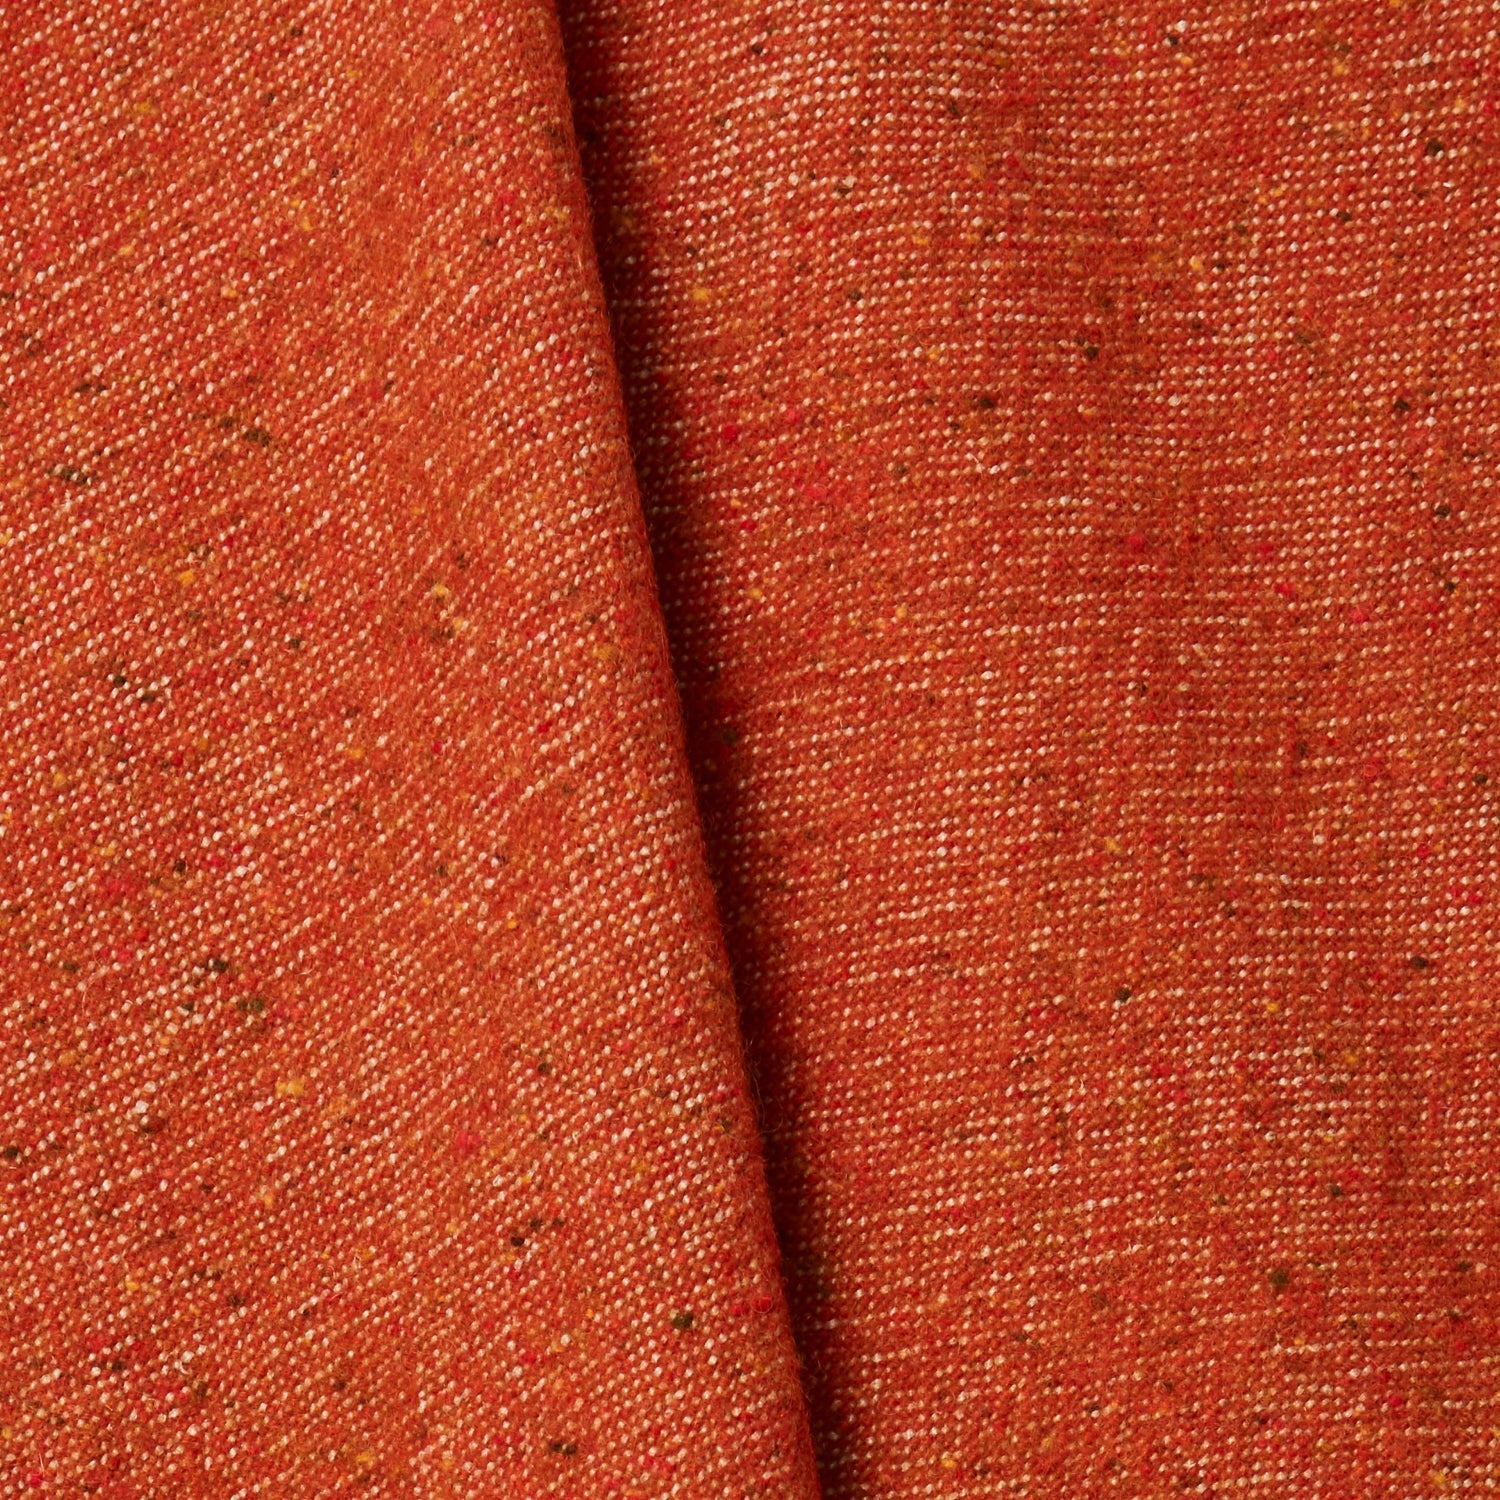 A draped swatch of blended linen-wool mix fabric in a flecked red color.